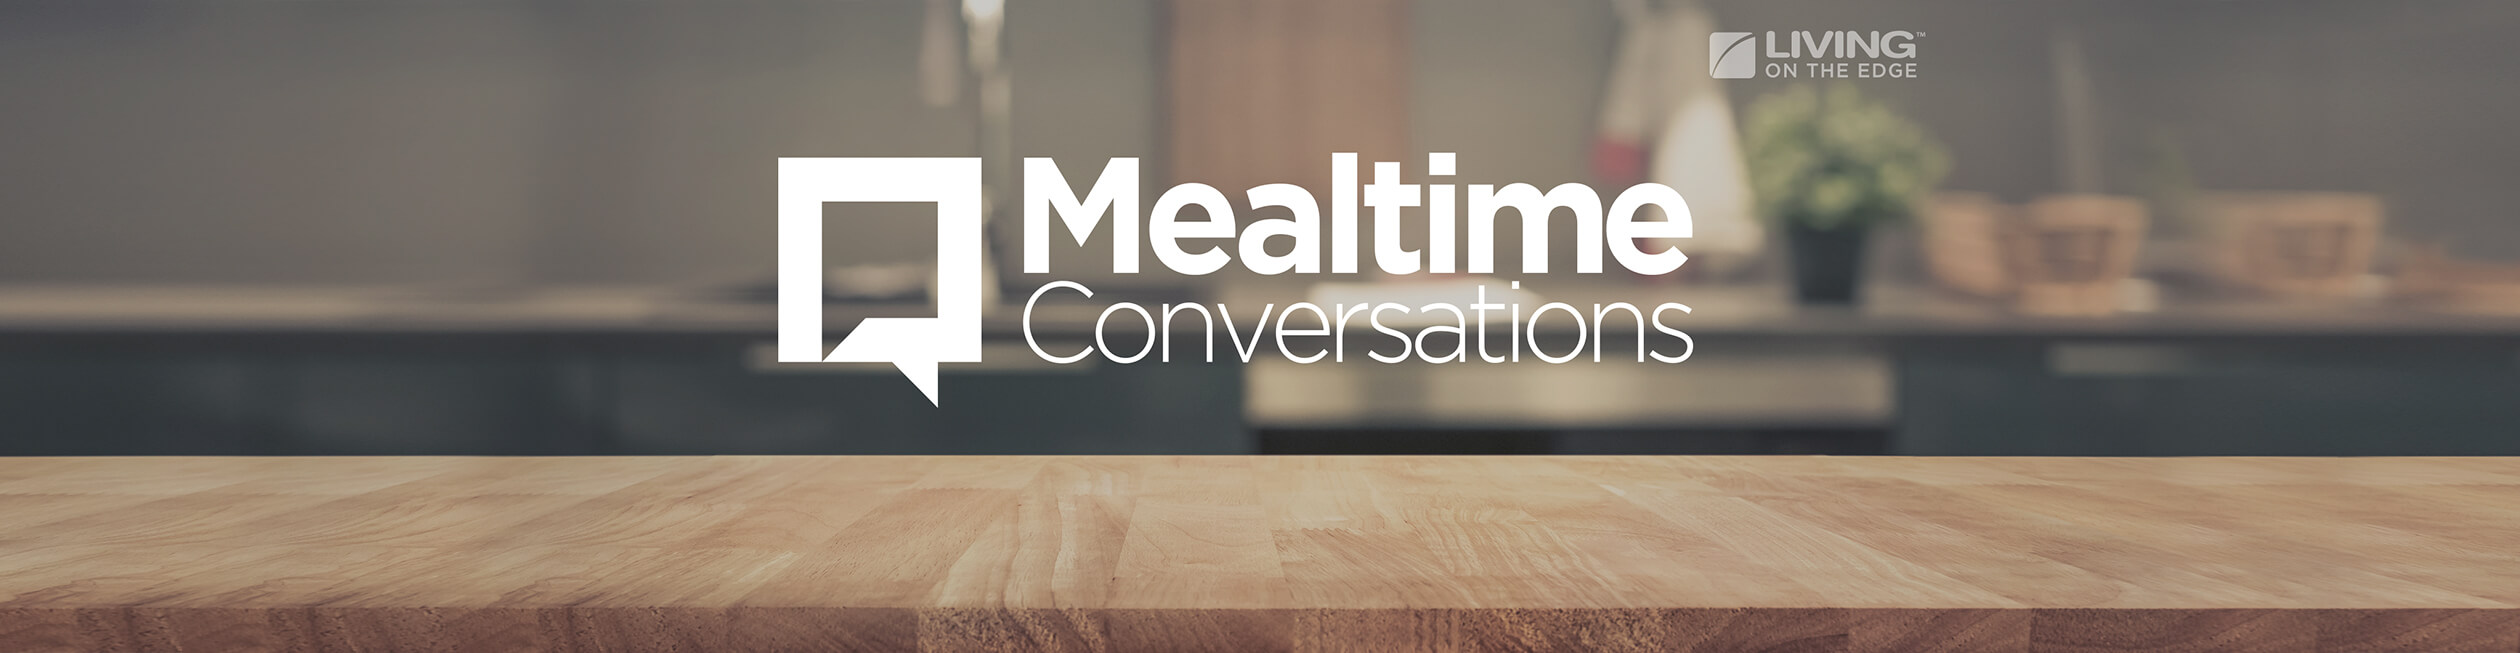 Mealtime Conversations for Families header 2520x653 jpg